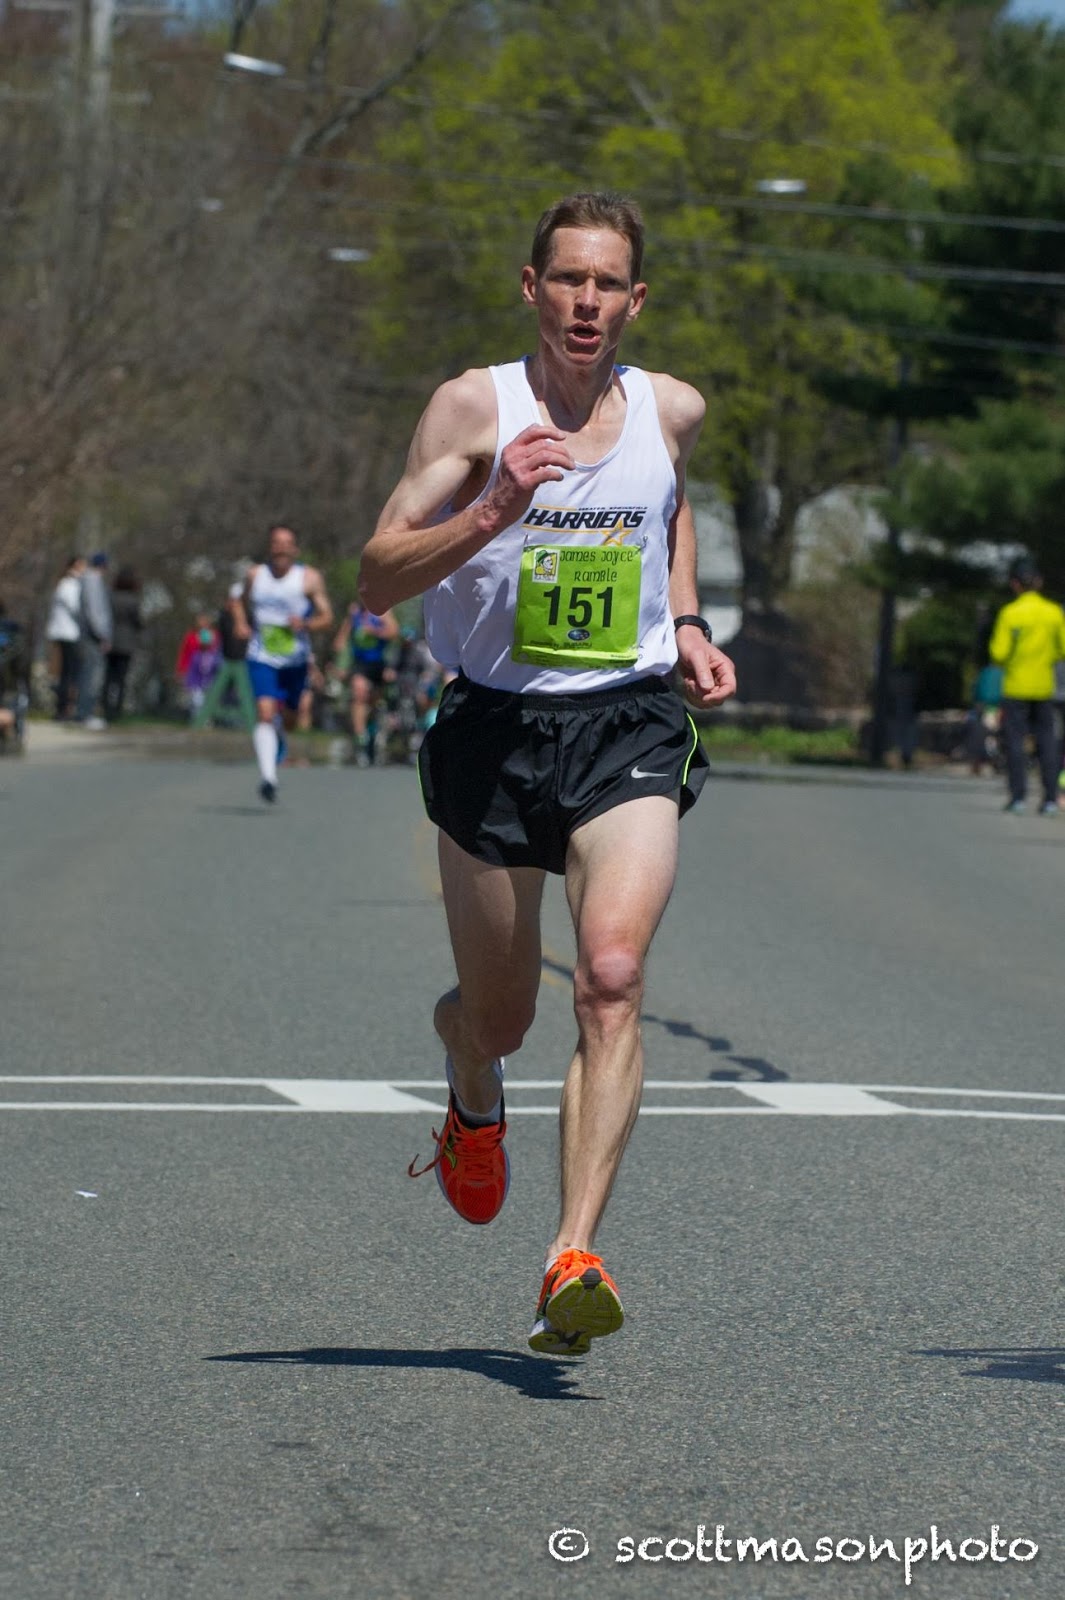 The Running Professor: Masters Road Mile Champions Crowned as Records Fall  at HAP Crim Festival of Races--Recap 1-Records, Overall Races and Age -Grading